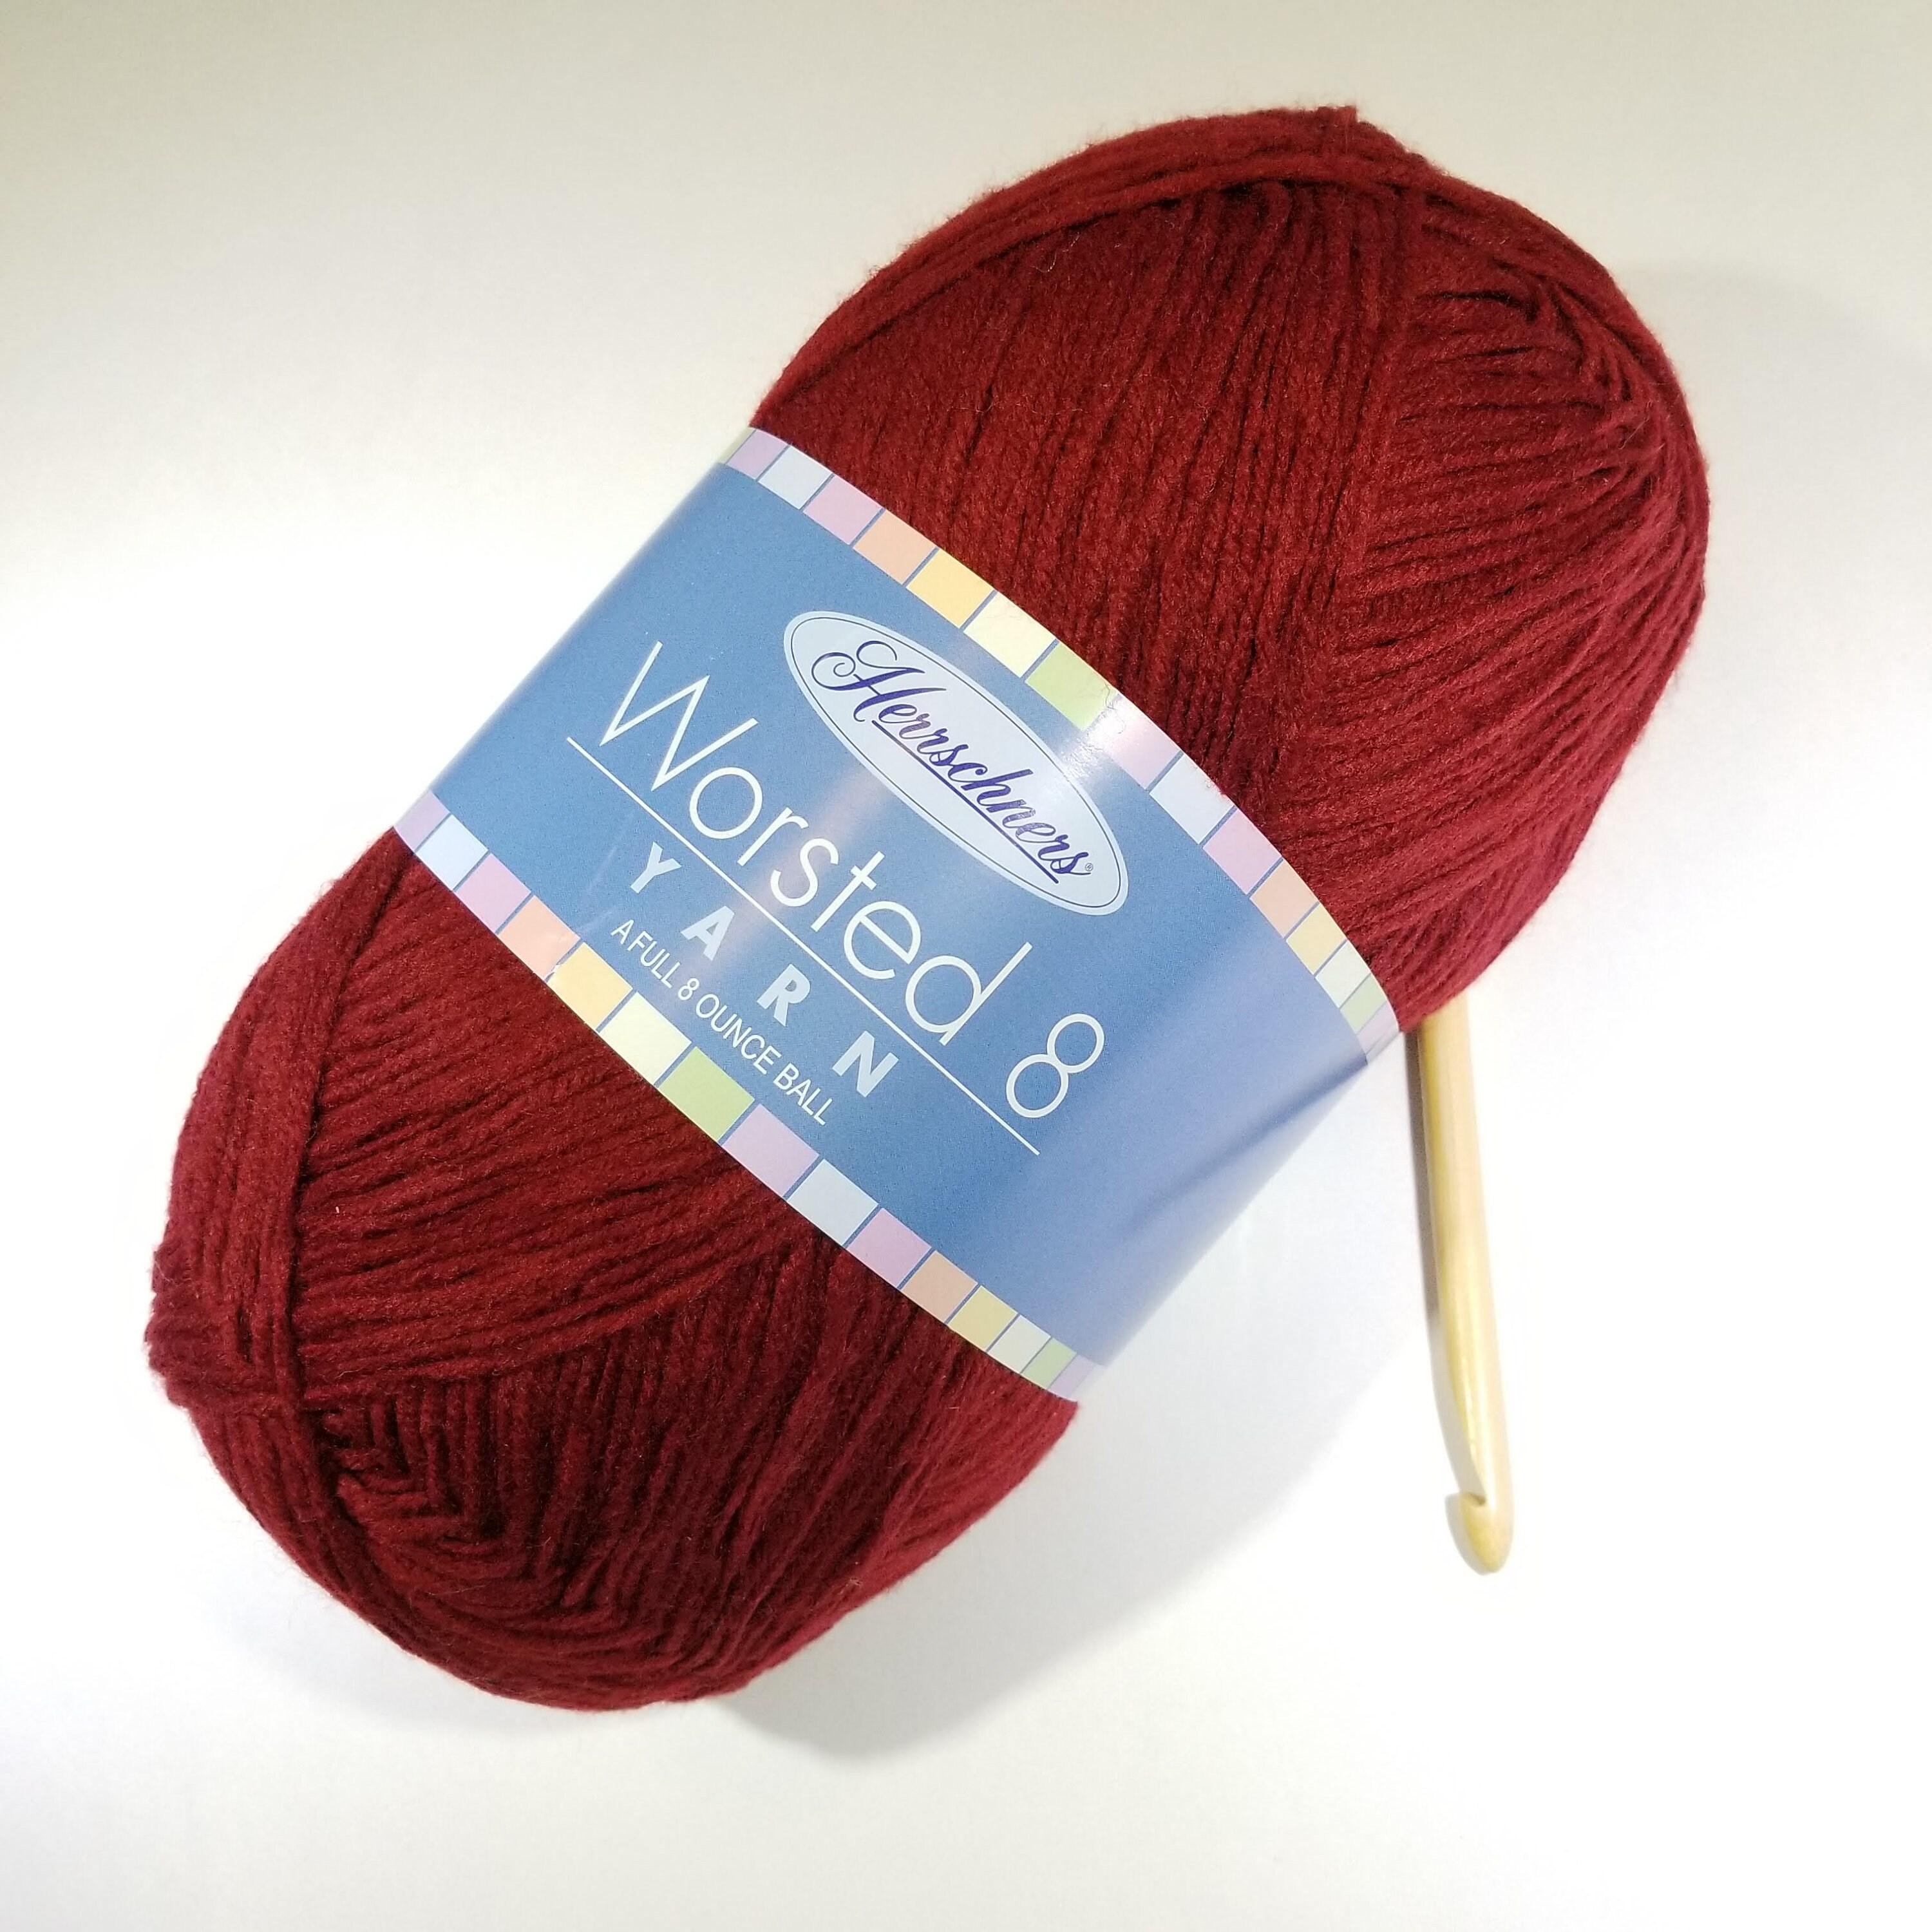 Herrschners Worsted 8 Multi Value Yarn Pack